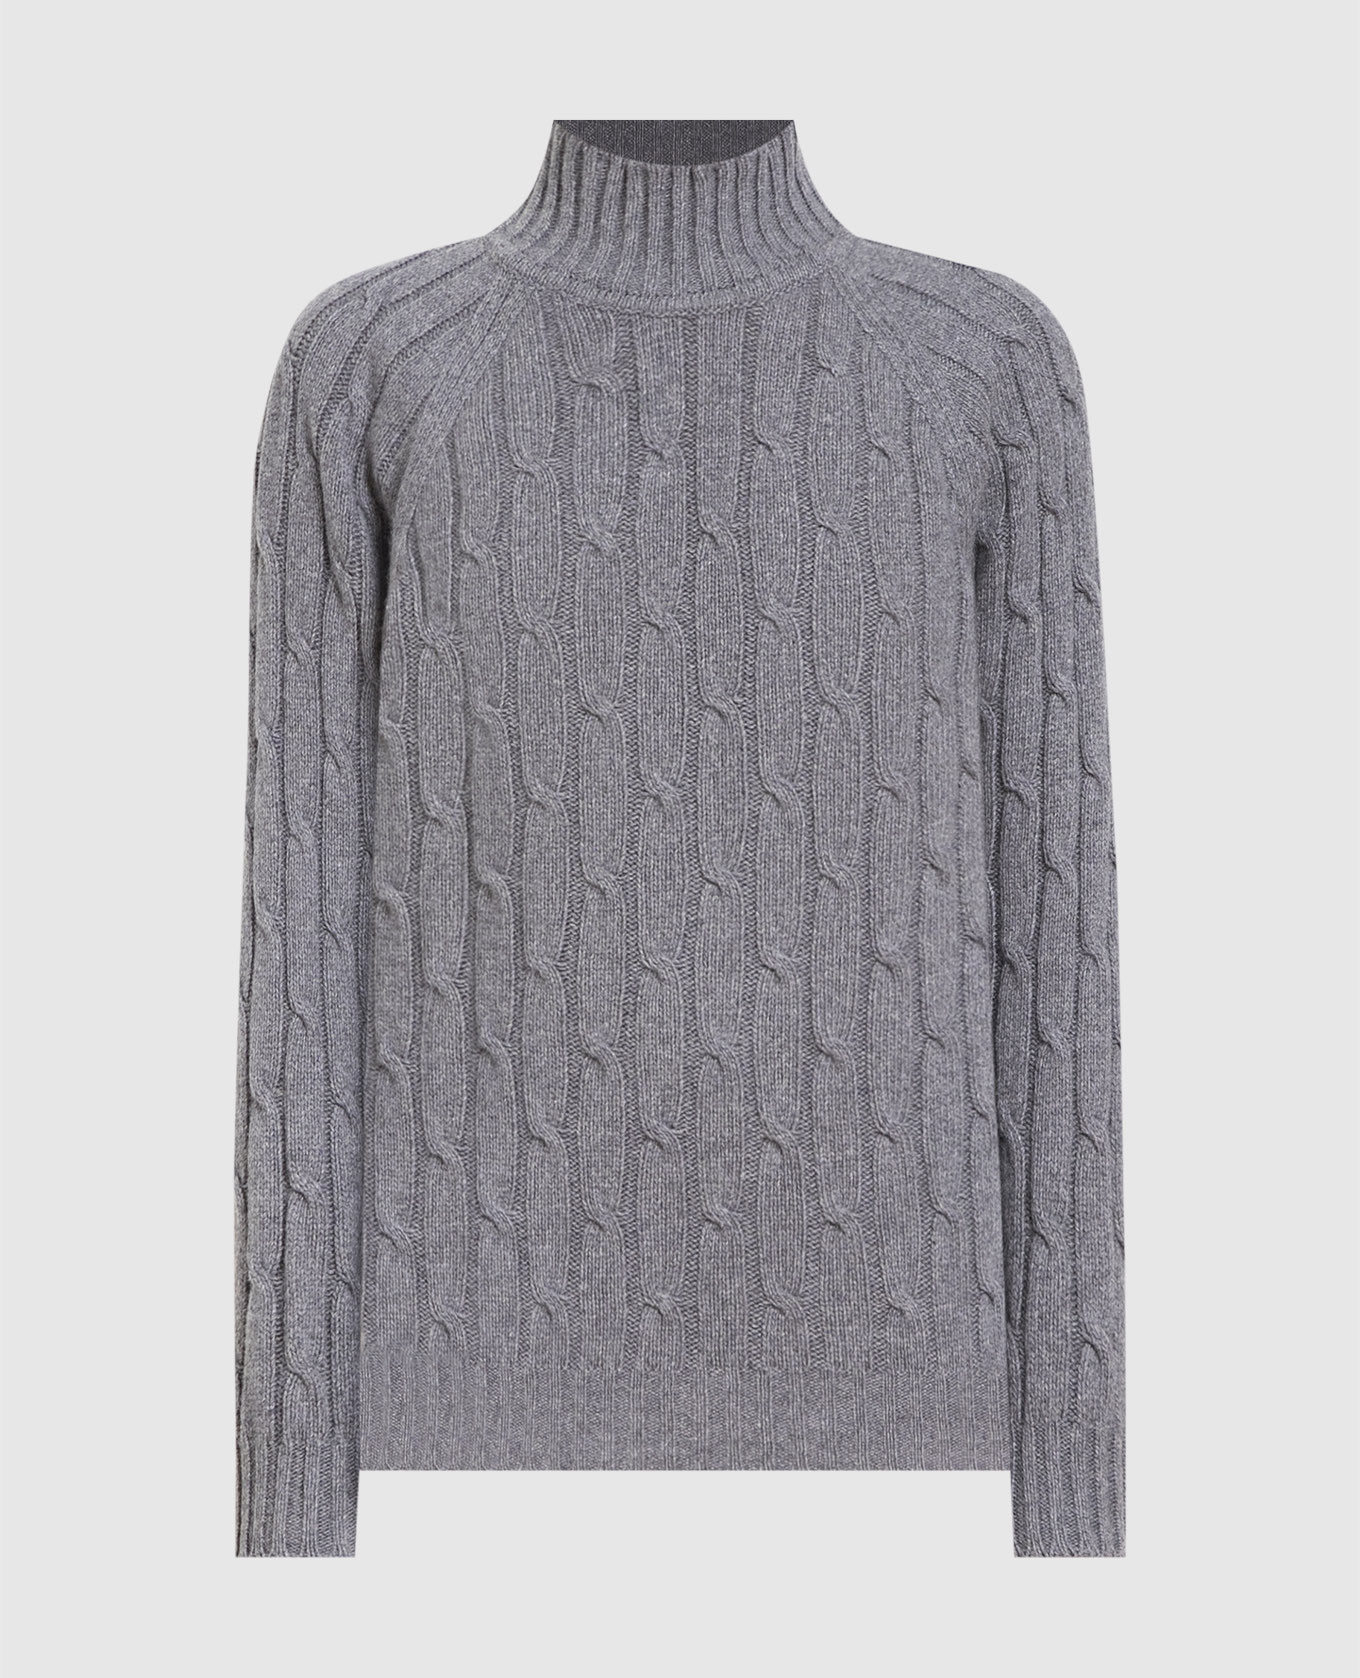 Gray sweater made of cashmere in a textured pattern